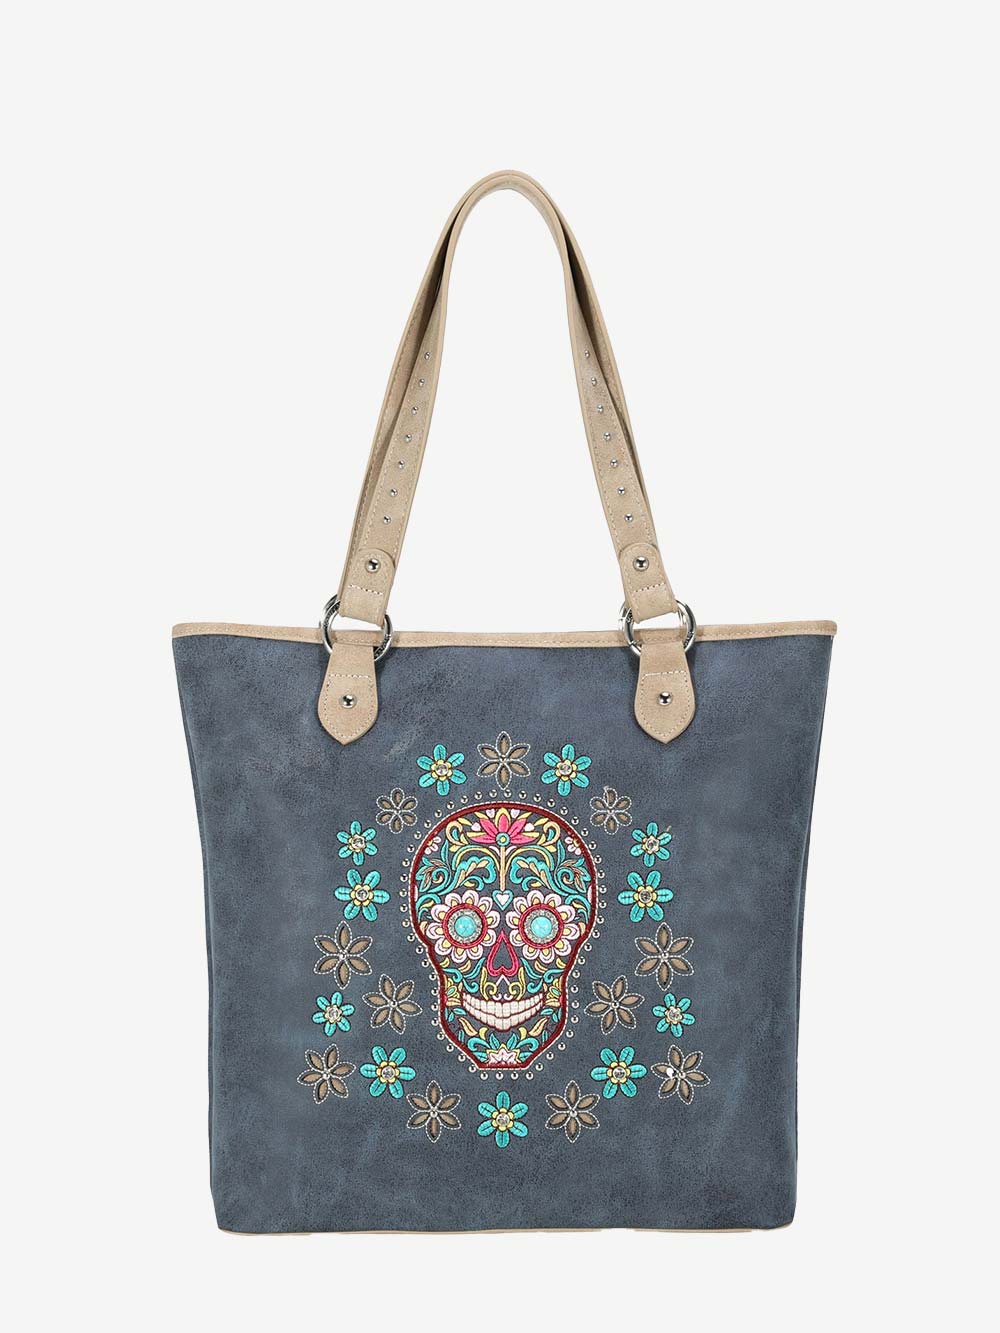 The Skull Bag with Wallet  Leather Skull Tote Purse Rivet 